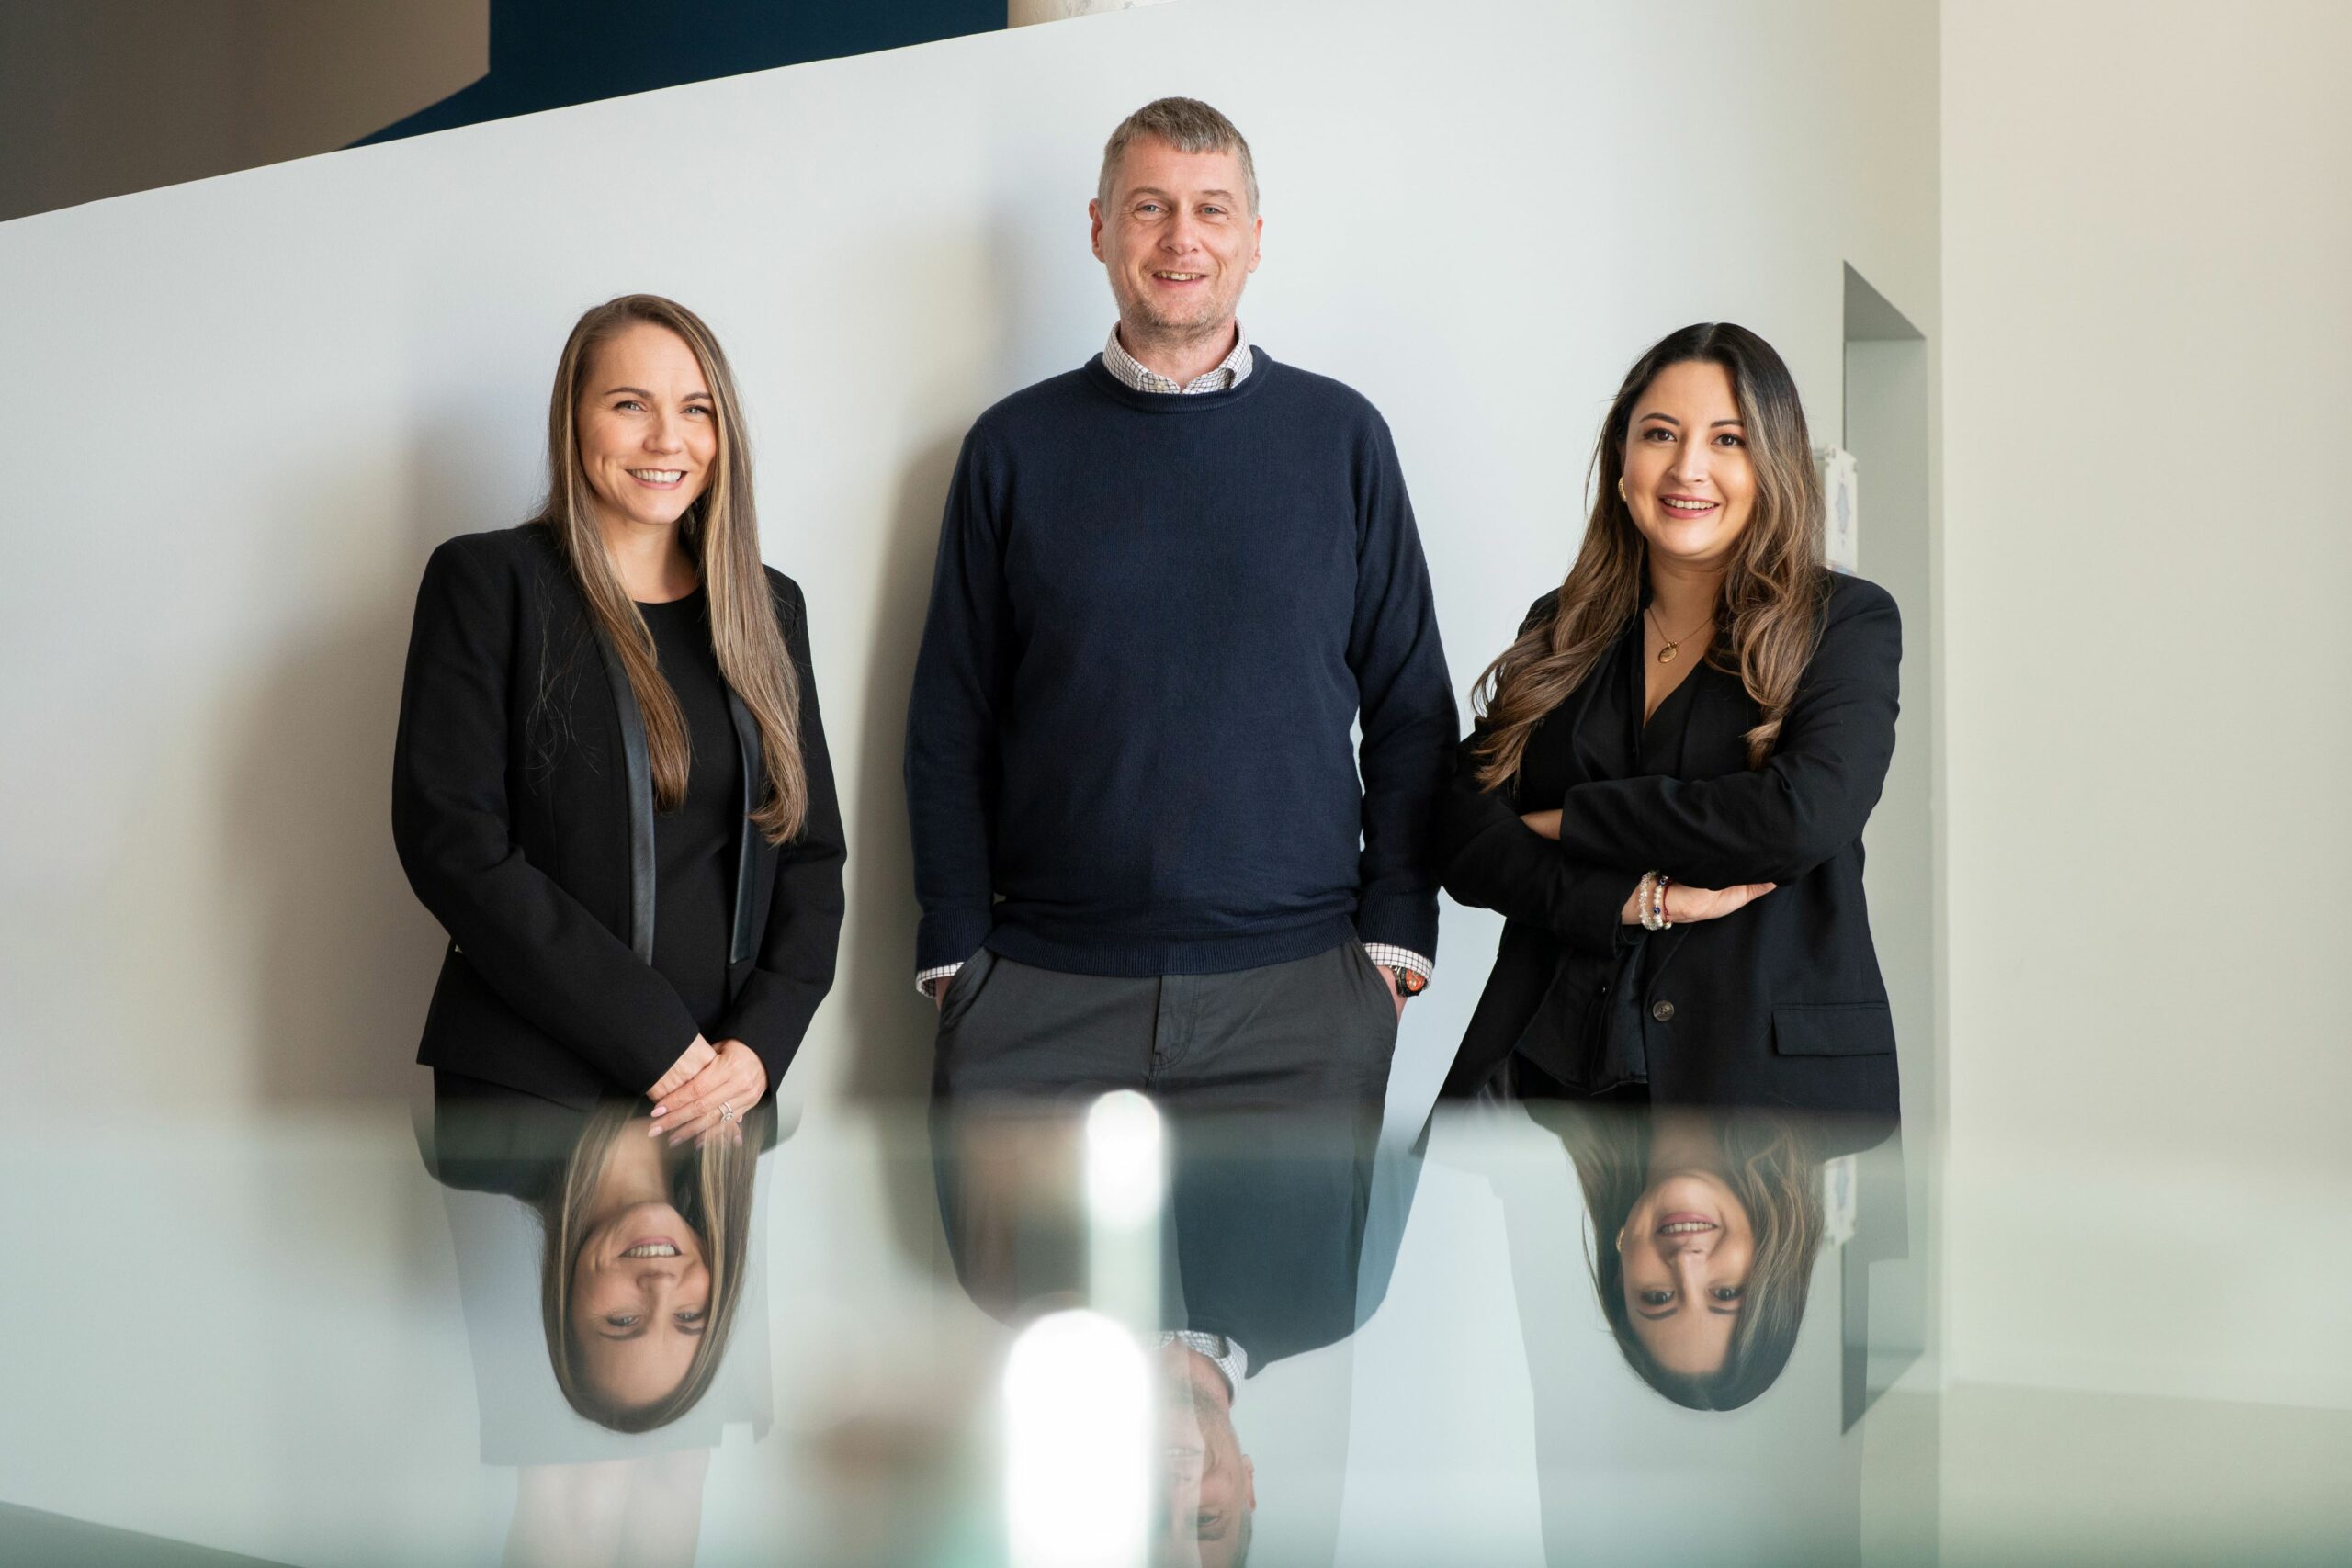 MEMBER NEWS: STC INSISO business growth drives strategic team expansion